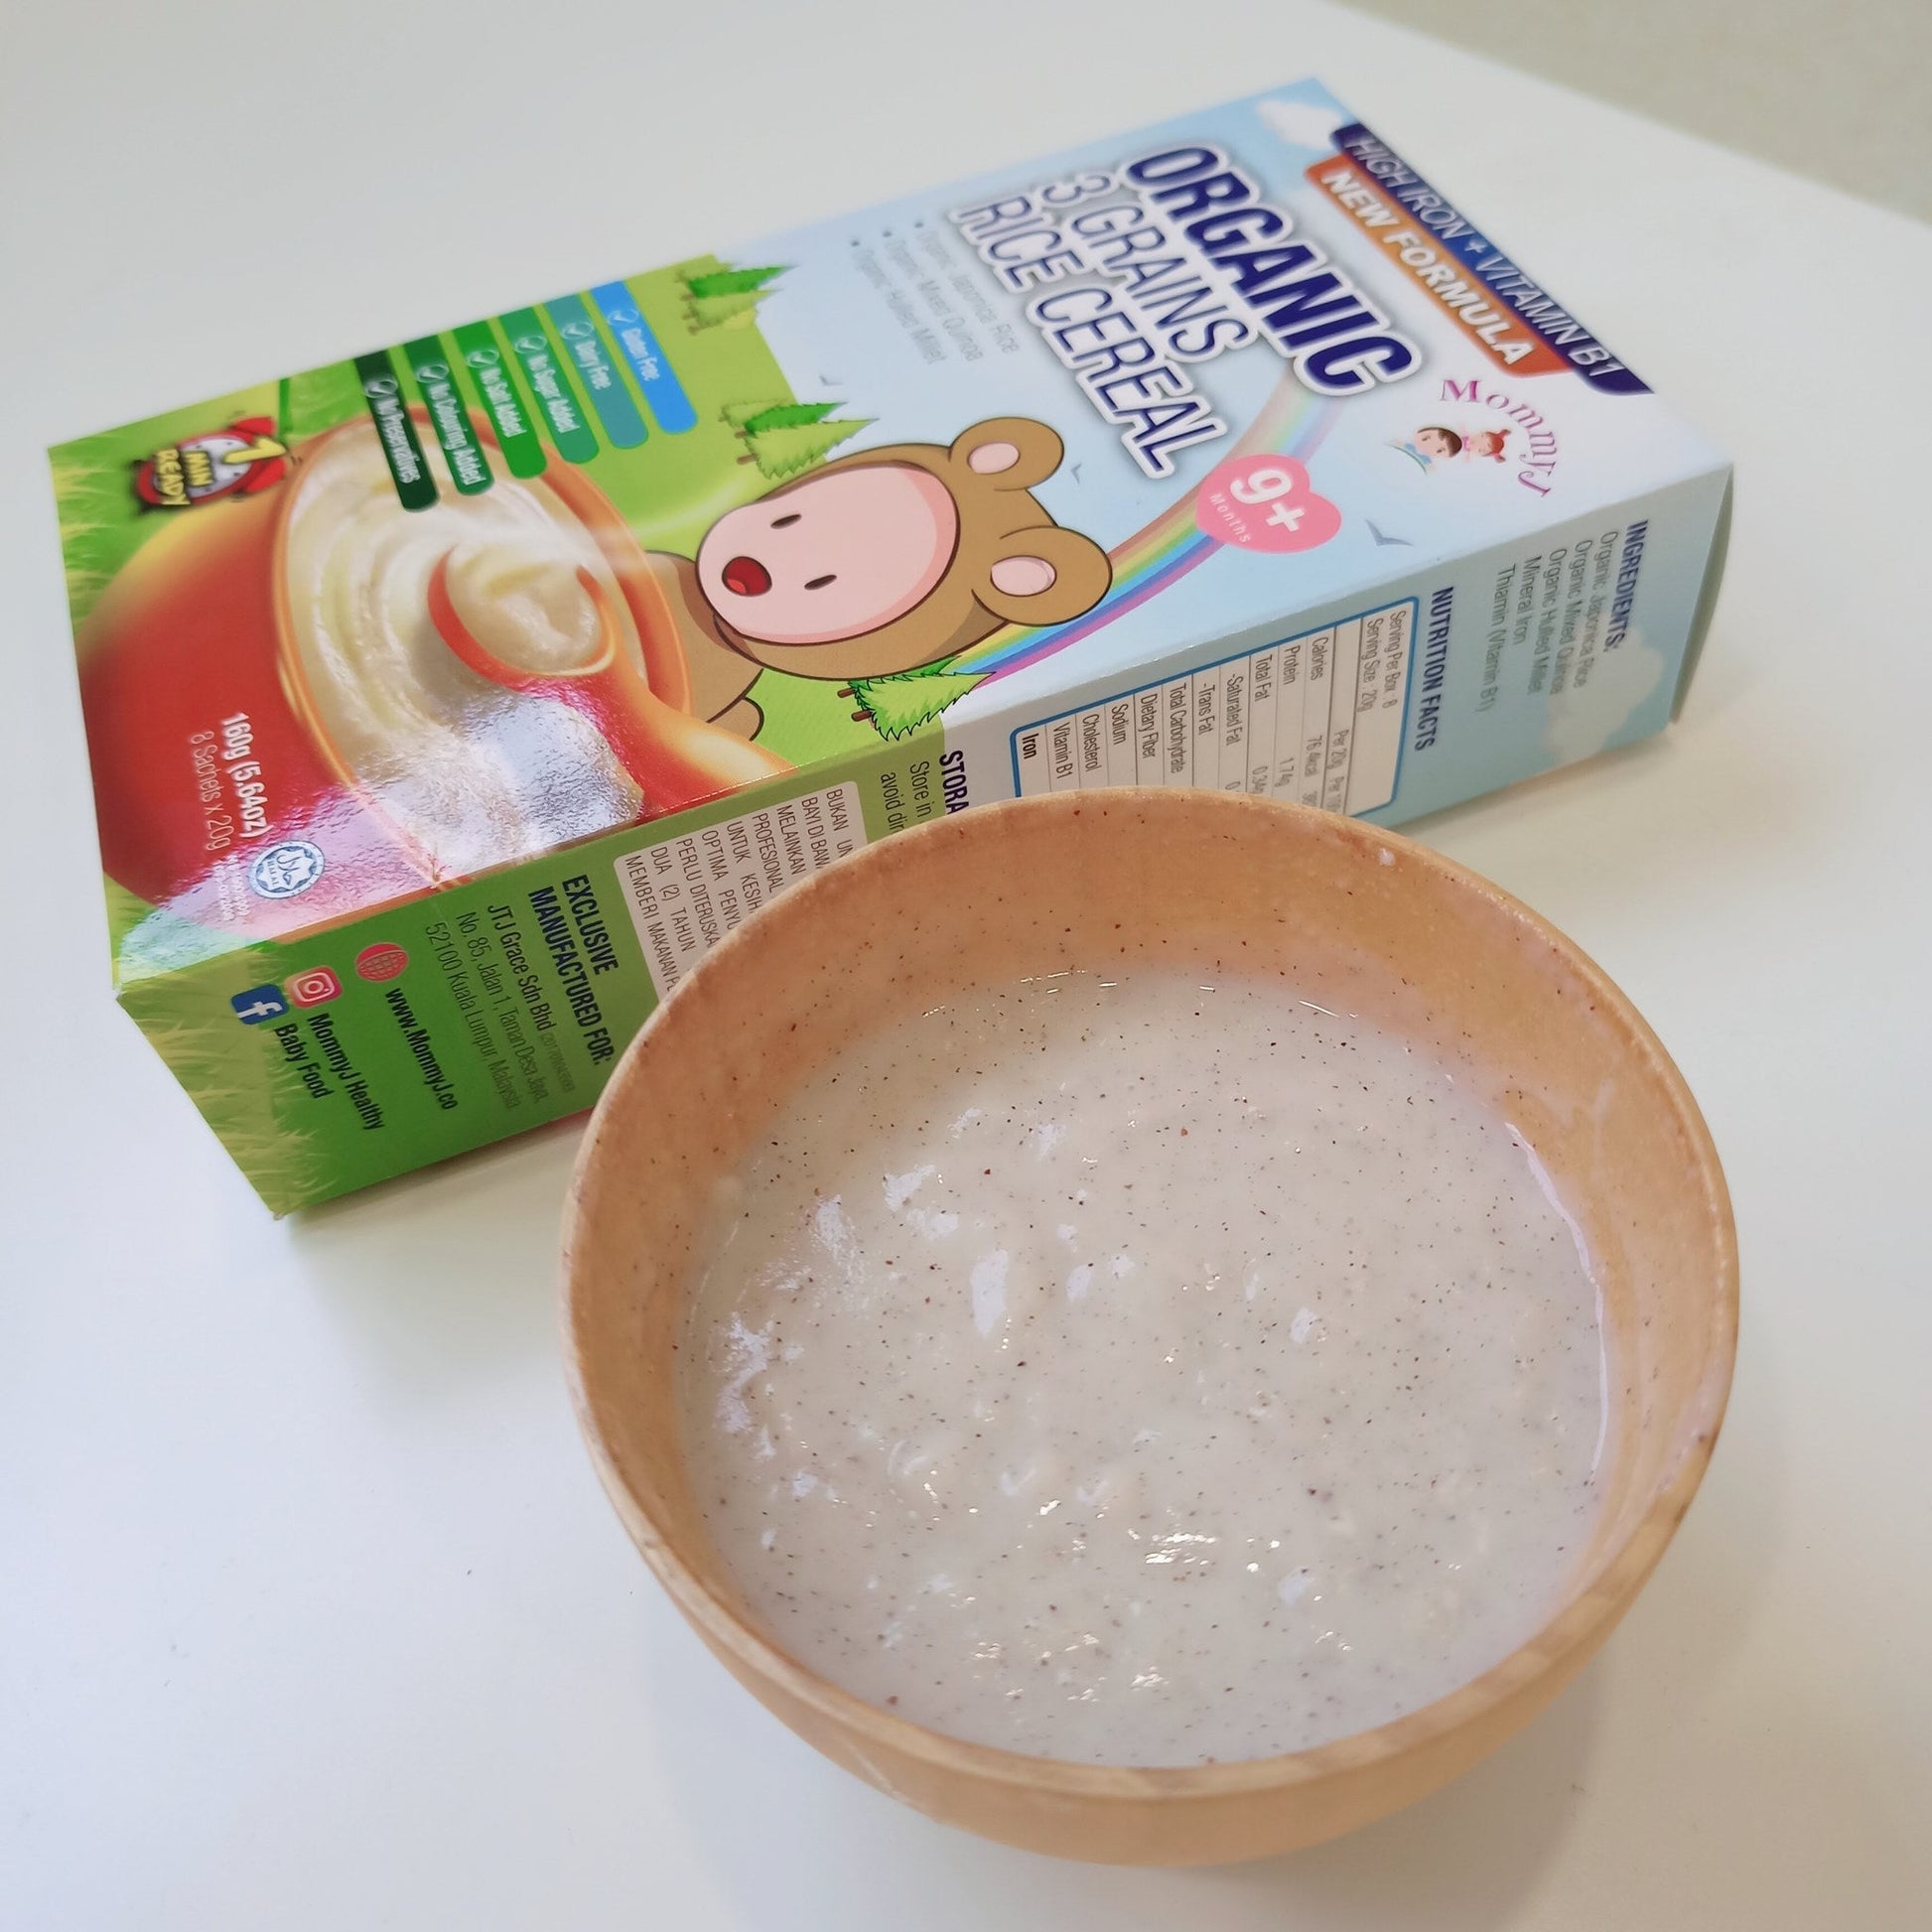 MommyJ Organic Baby Rice Cereal New Formula with Iron Fortified (2 Flavours) / 宝宝高铁有机纯米糊 (2种口味) - Fish Club